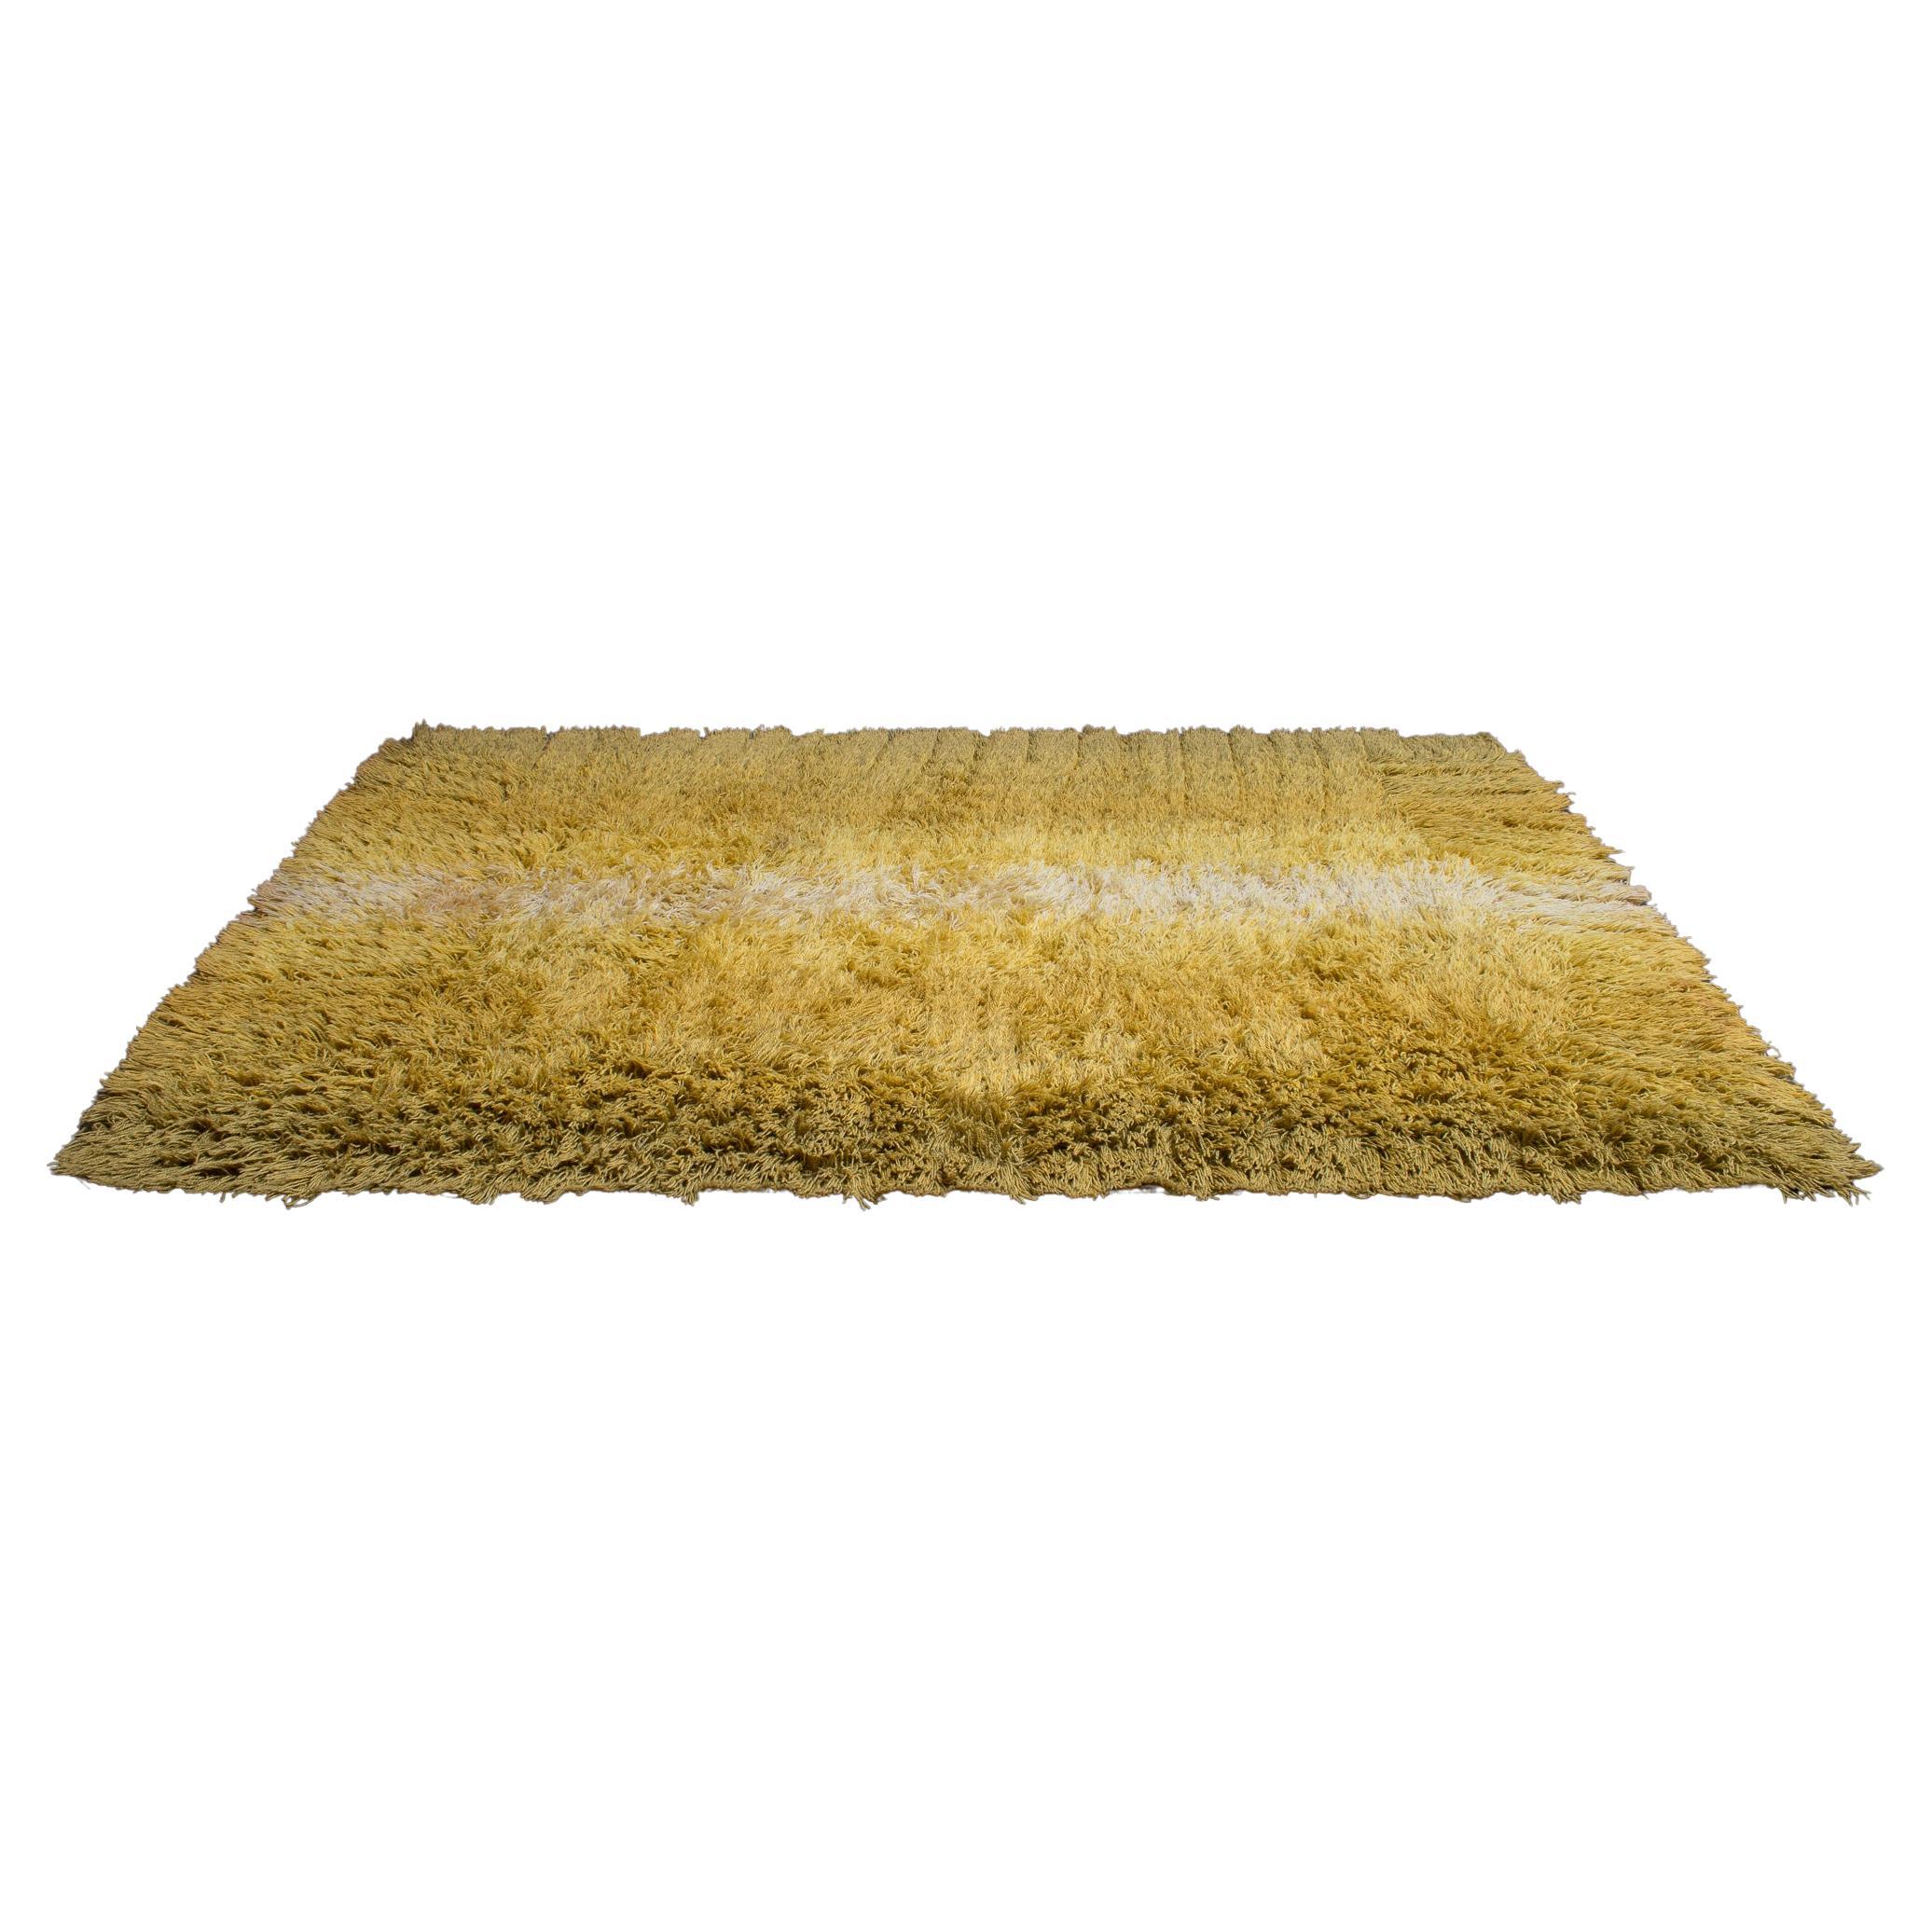 Swedish Shag Rya rug, A great abstract design in various shades of yellow and light green. Nice smaller size for accenting a part of a room.